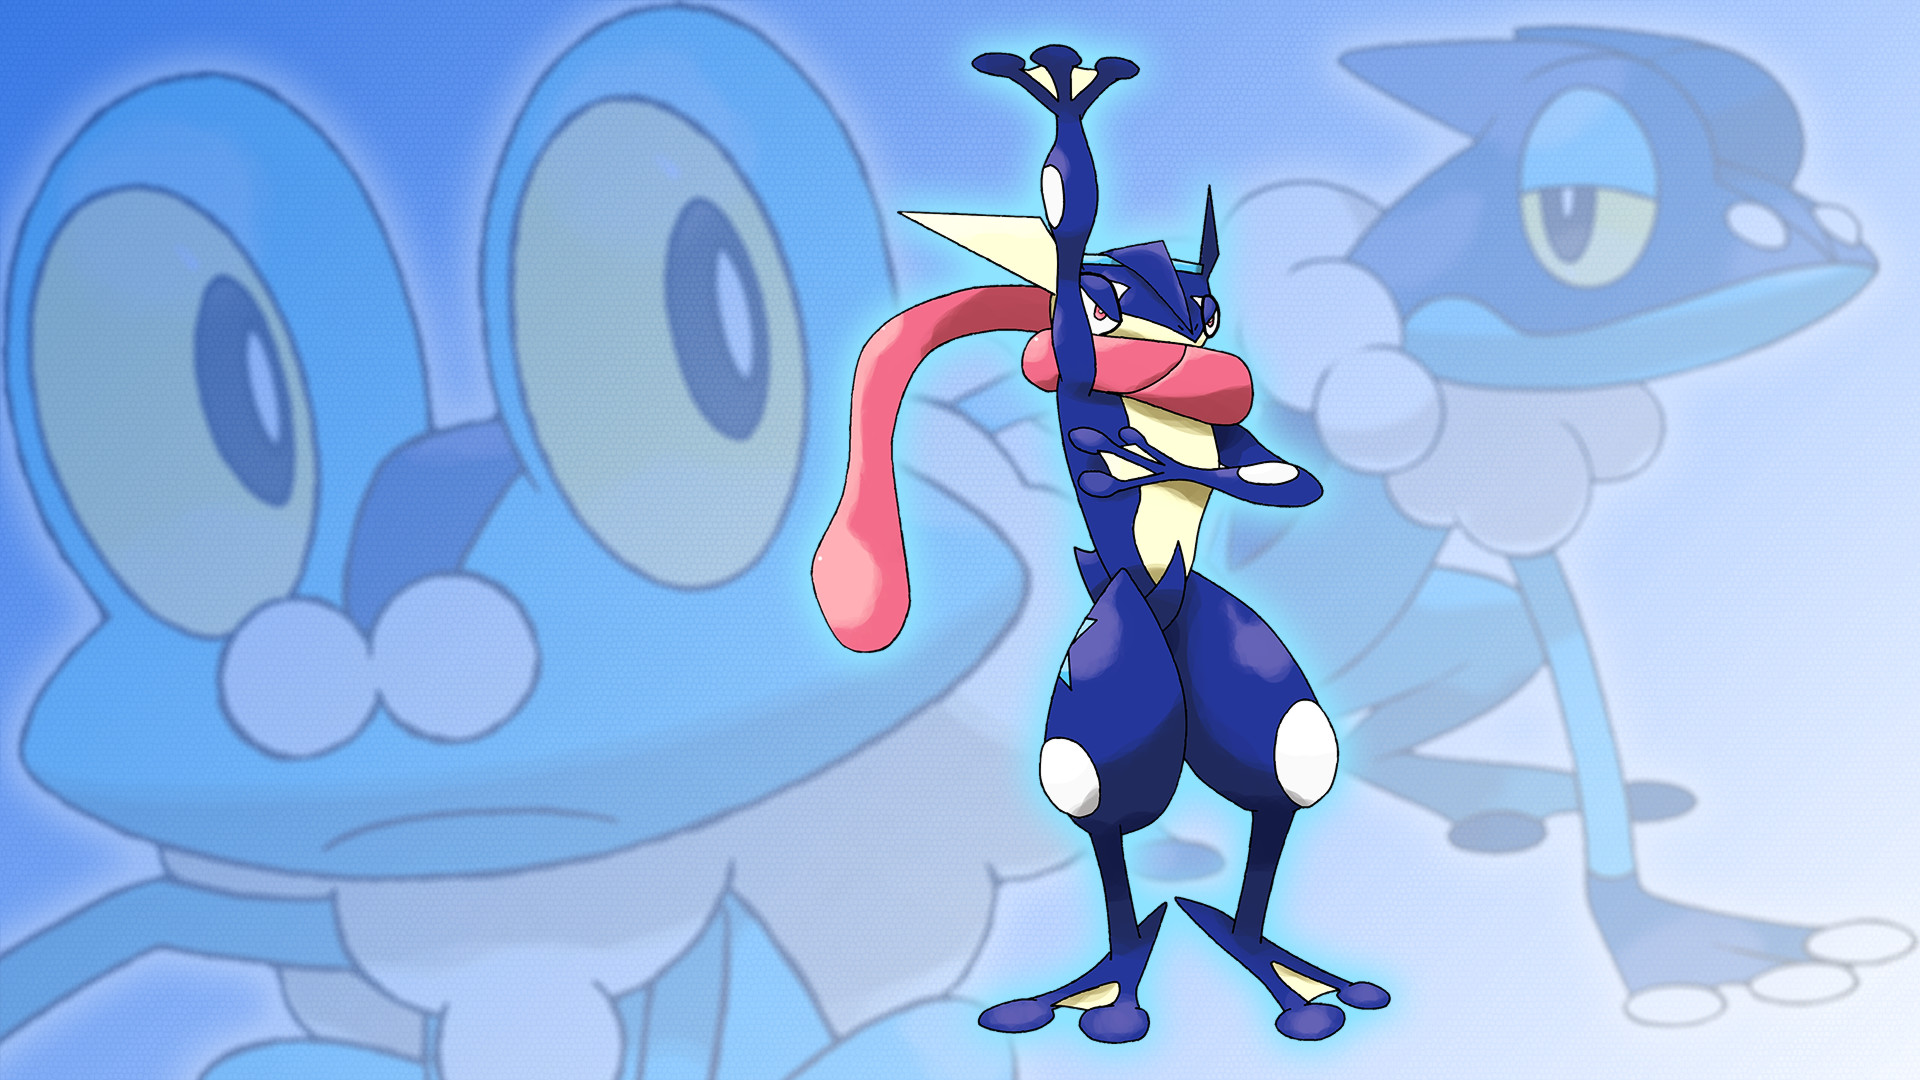 Frogadier Hd Wallpapers